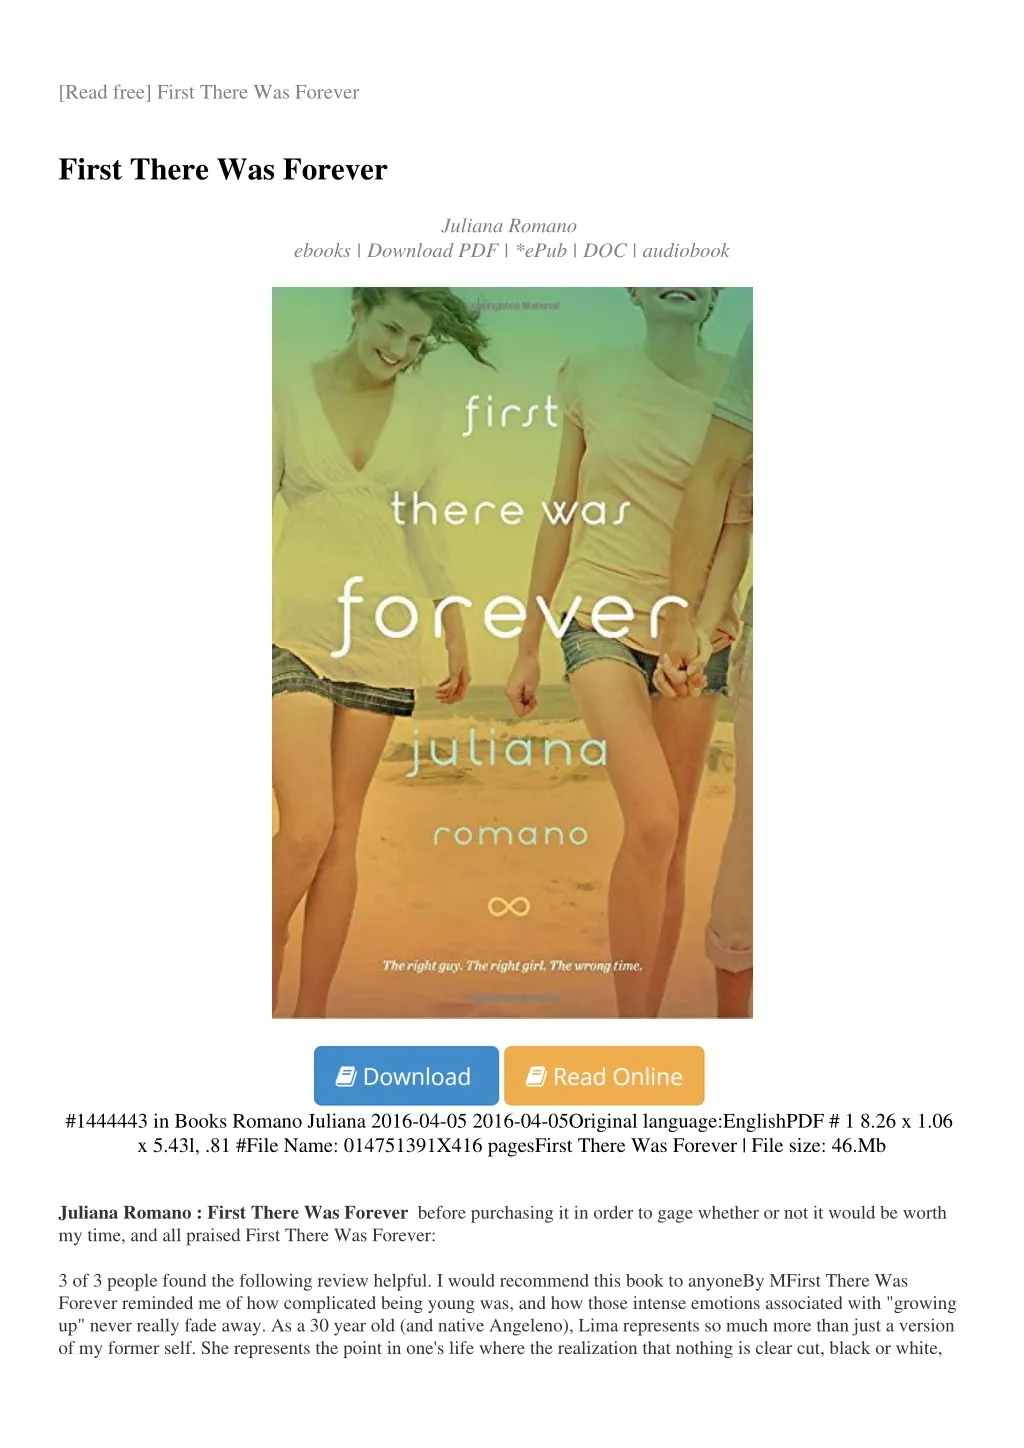 read free first there was forever